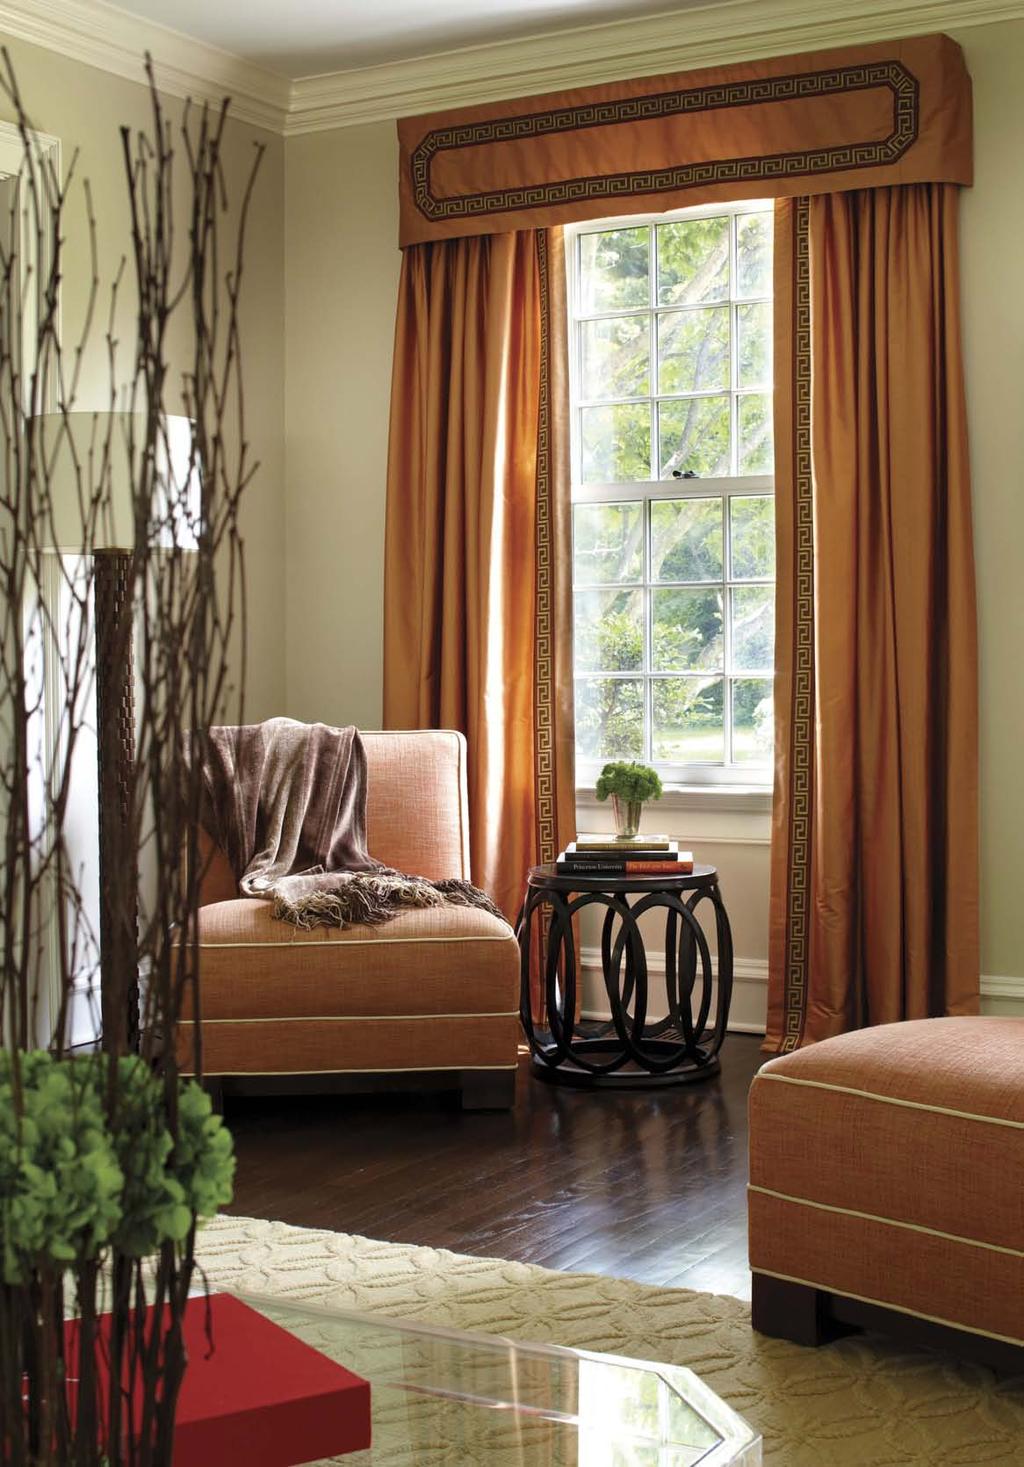 Luxurious silk drapery panels in a vibrant shade of orange dress the windows in the living room.